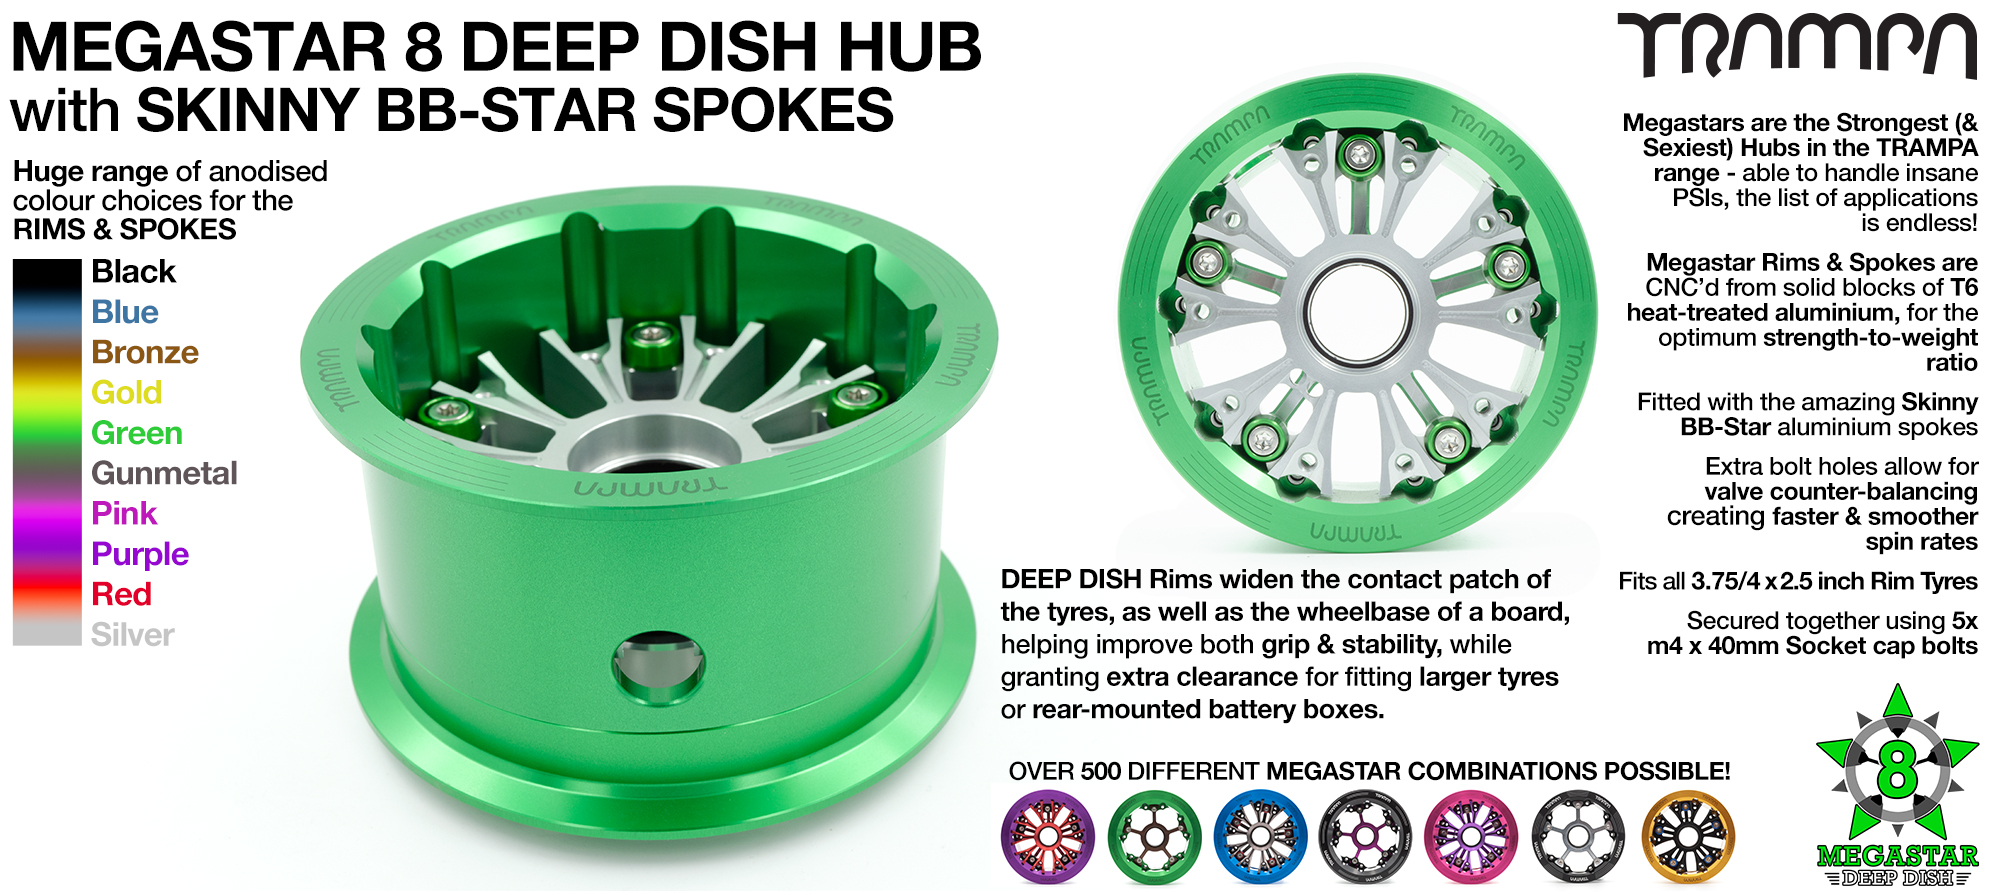 Deep-Dish MEGASTAR 8 Hubs - 3.75 x 2.5 Inch - Fits Pneumatic tyres up to 8 Inches in outer diameter